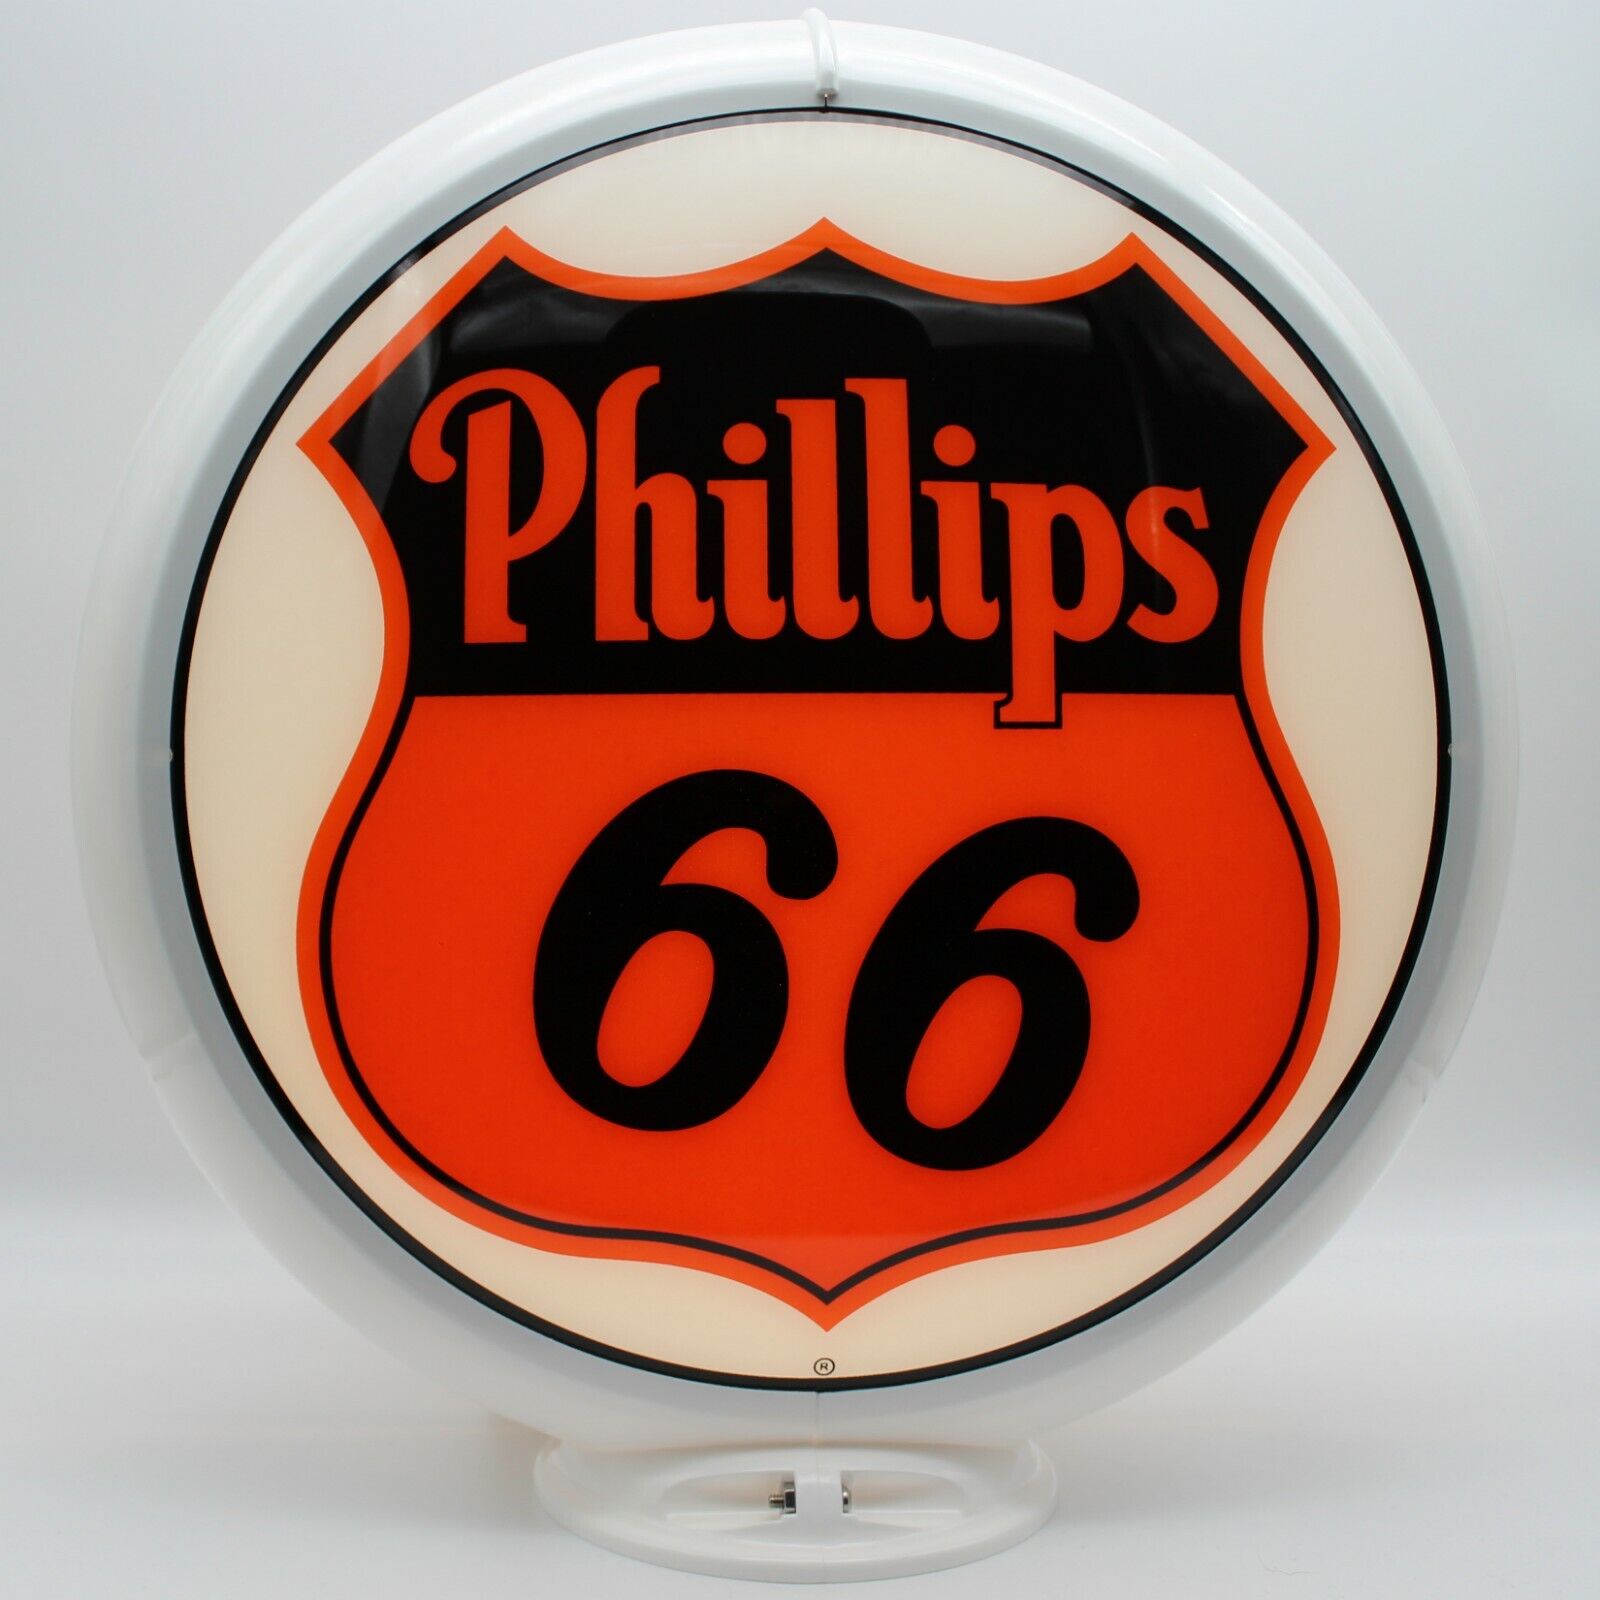 PHILLIPS 66 Gas Pump Globe - SHIPS FULLY ASSEMBLED READY FOR YOUR PUMP